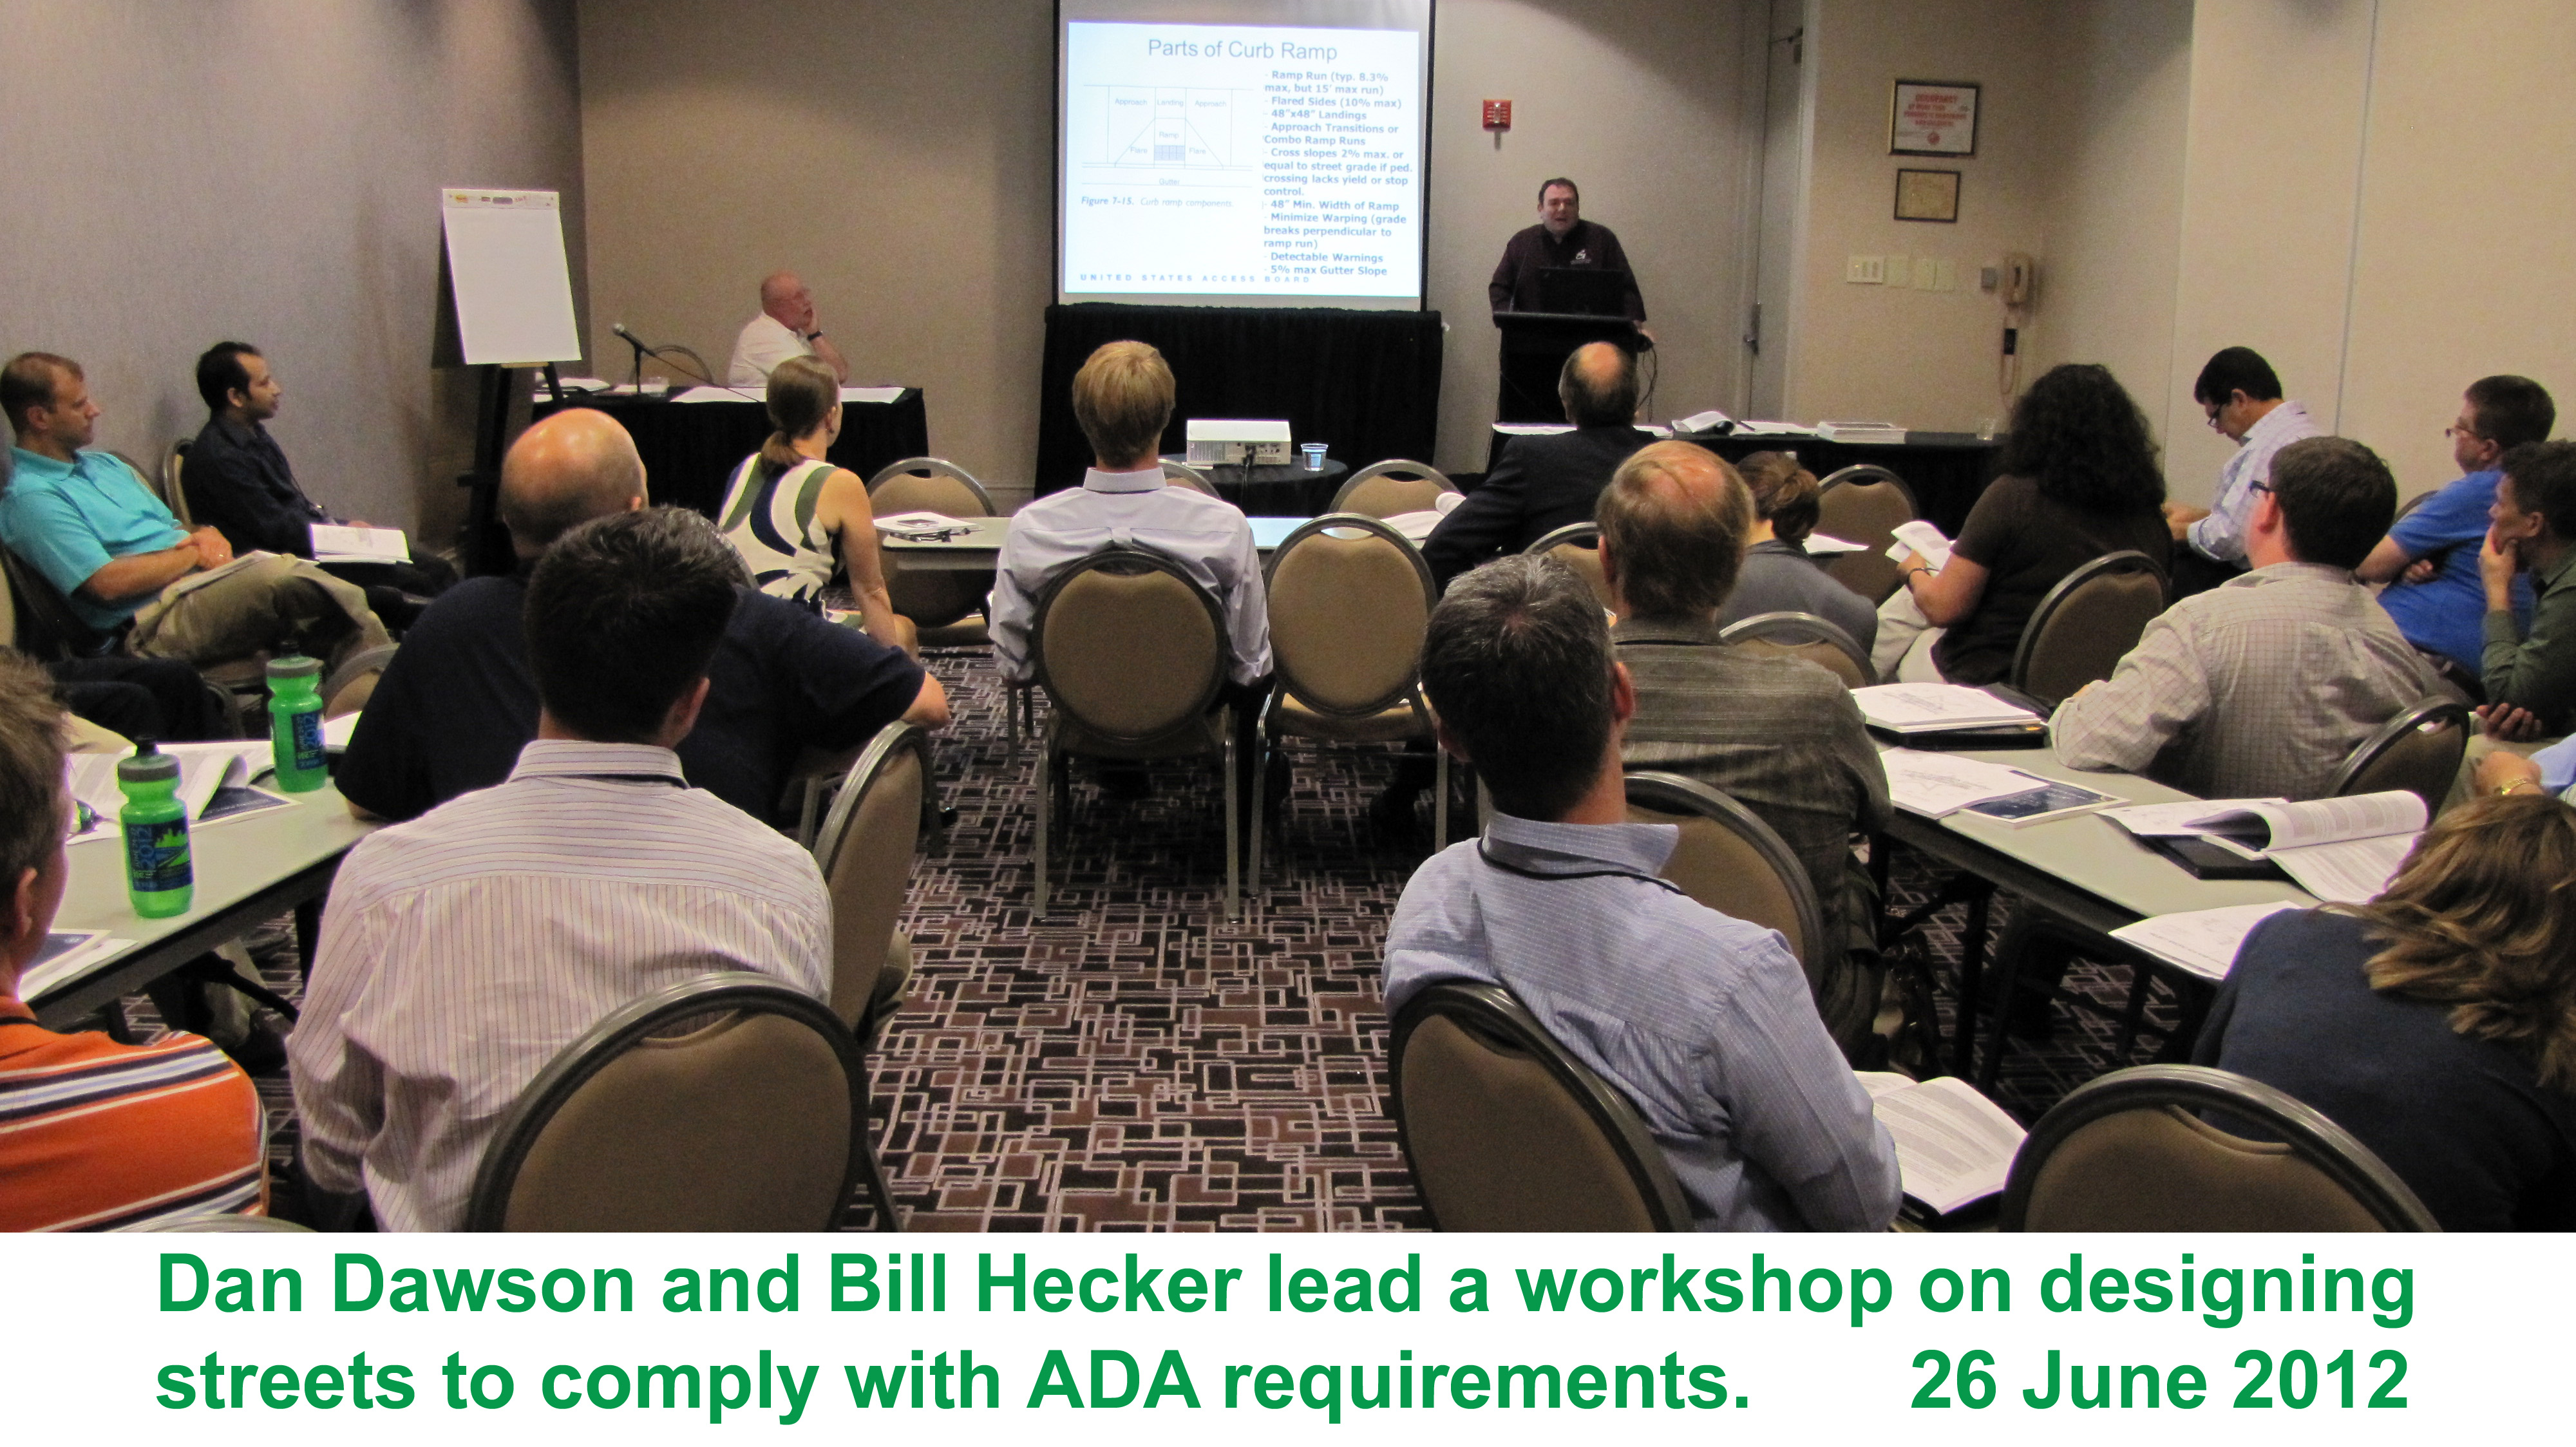 4th Urban Street Symposium: Dan Dawson and Bill Hecker lead a June 26 workshop on designing streets to comply with ADA requirements